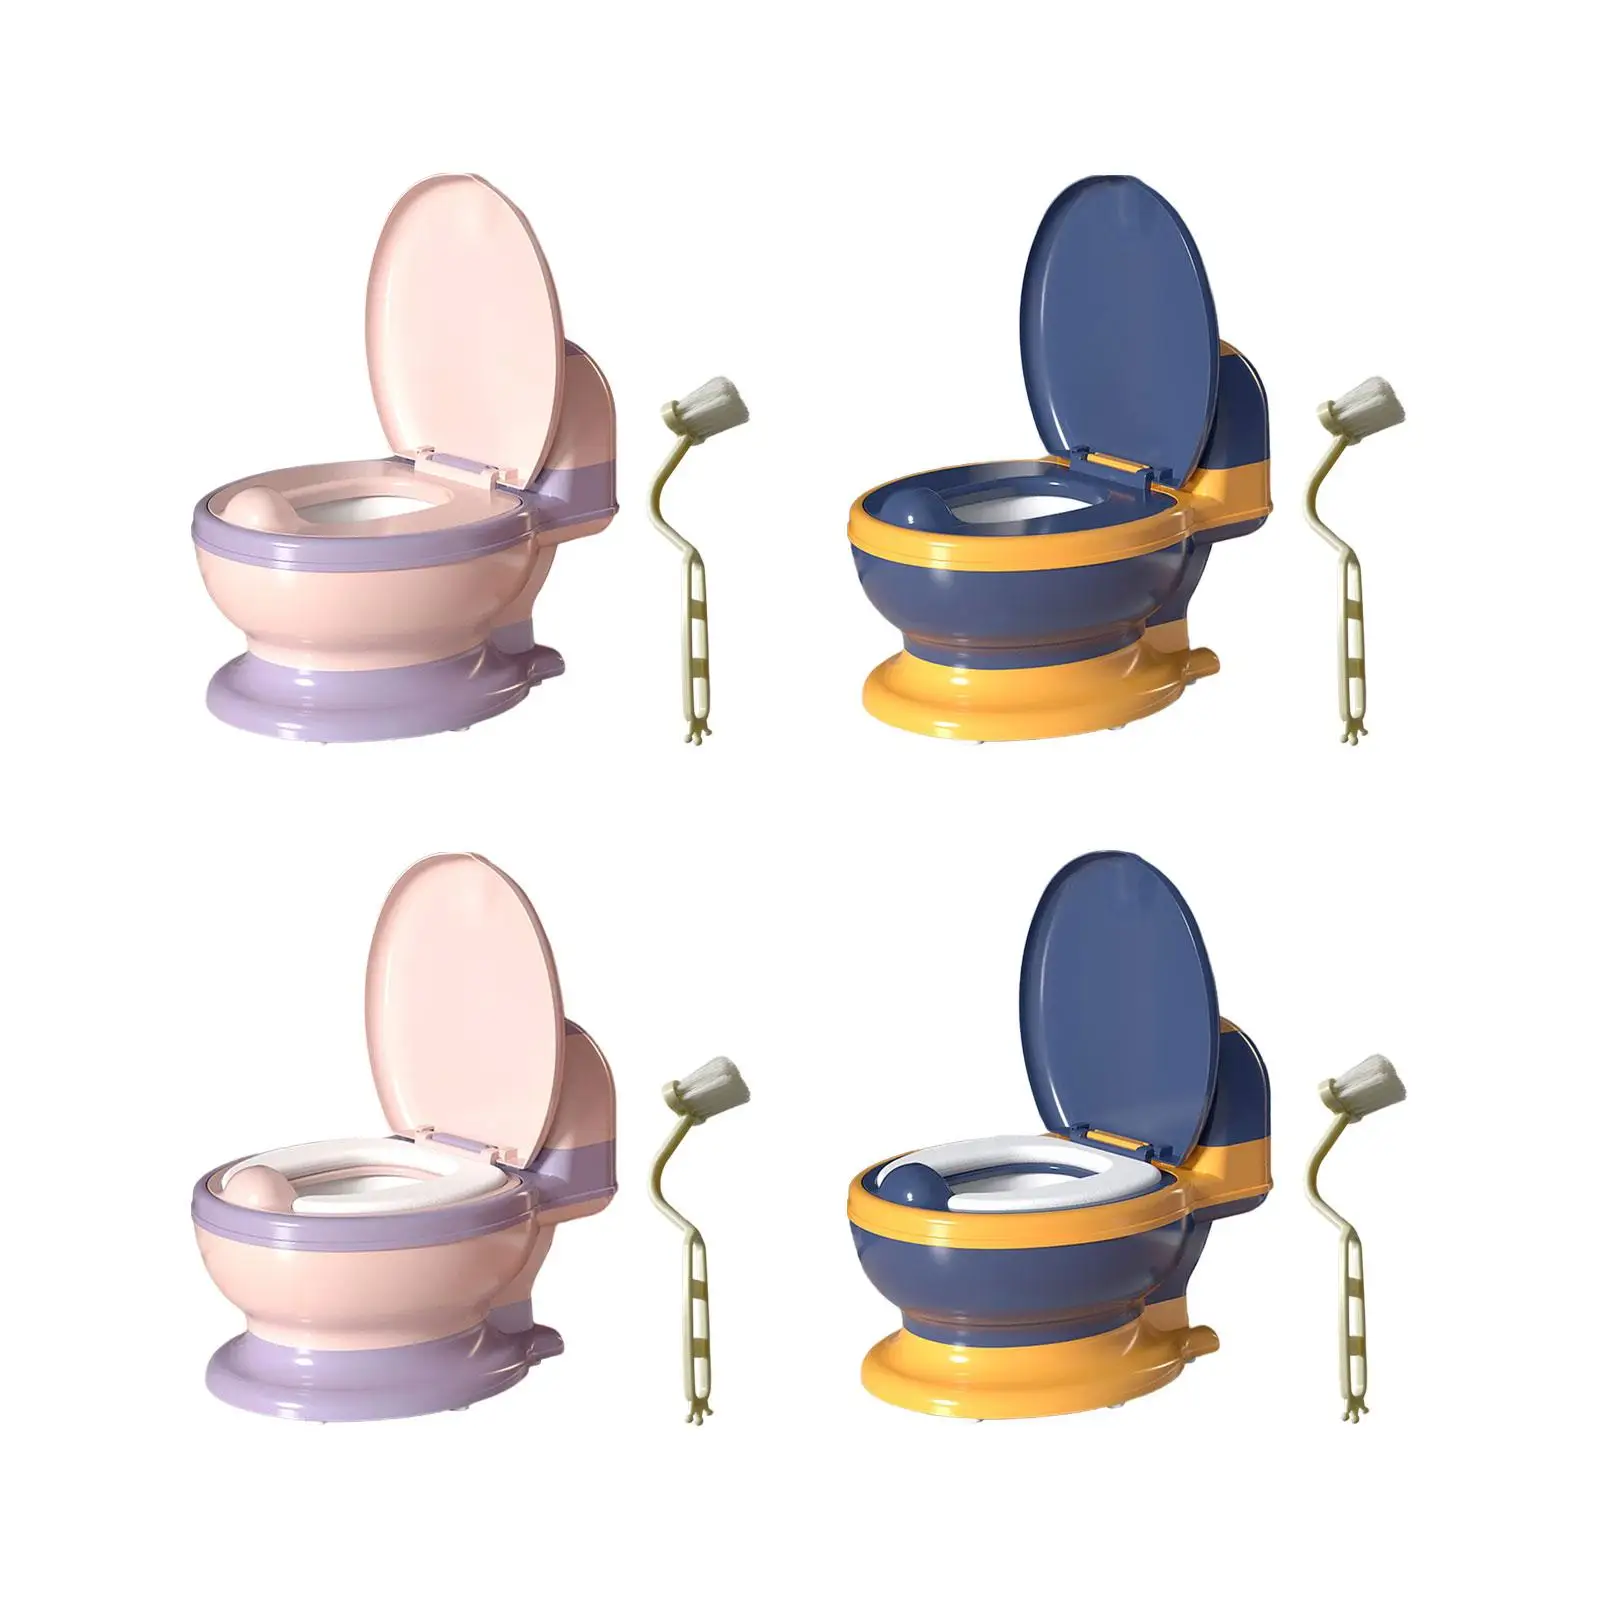 Baby Potty Toilet with Spilling Guard Comfortable Includes Cleaning Brush Training Transition Potty Seat Infants Babies Kids